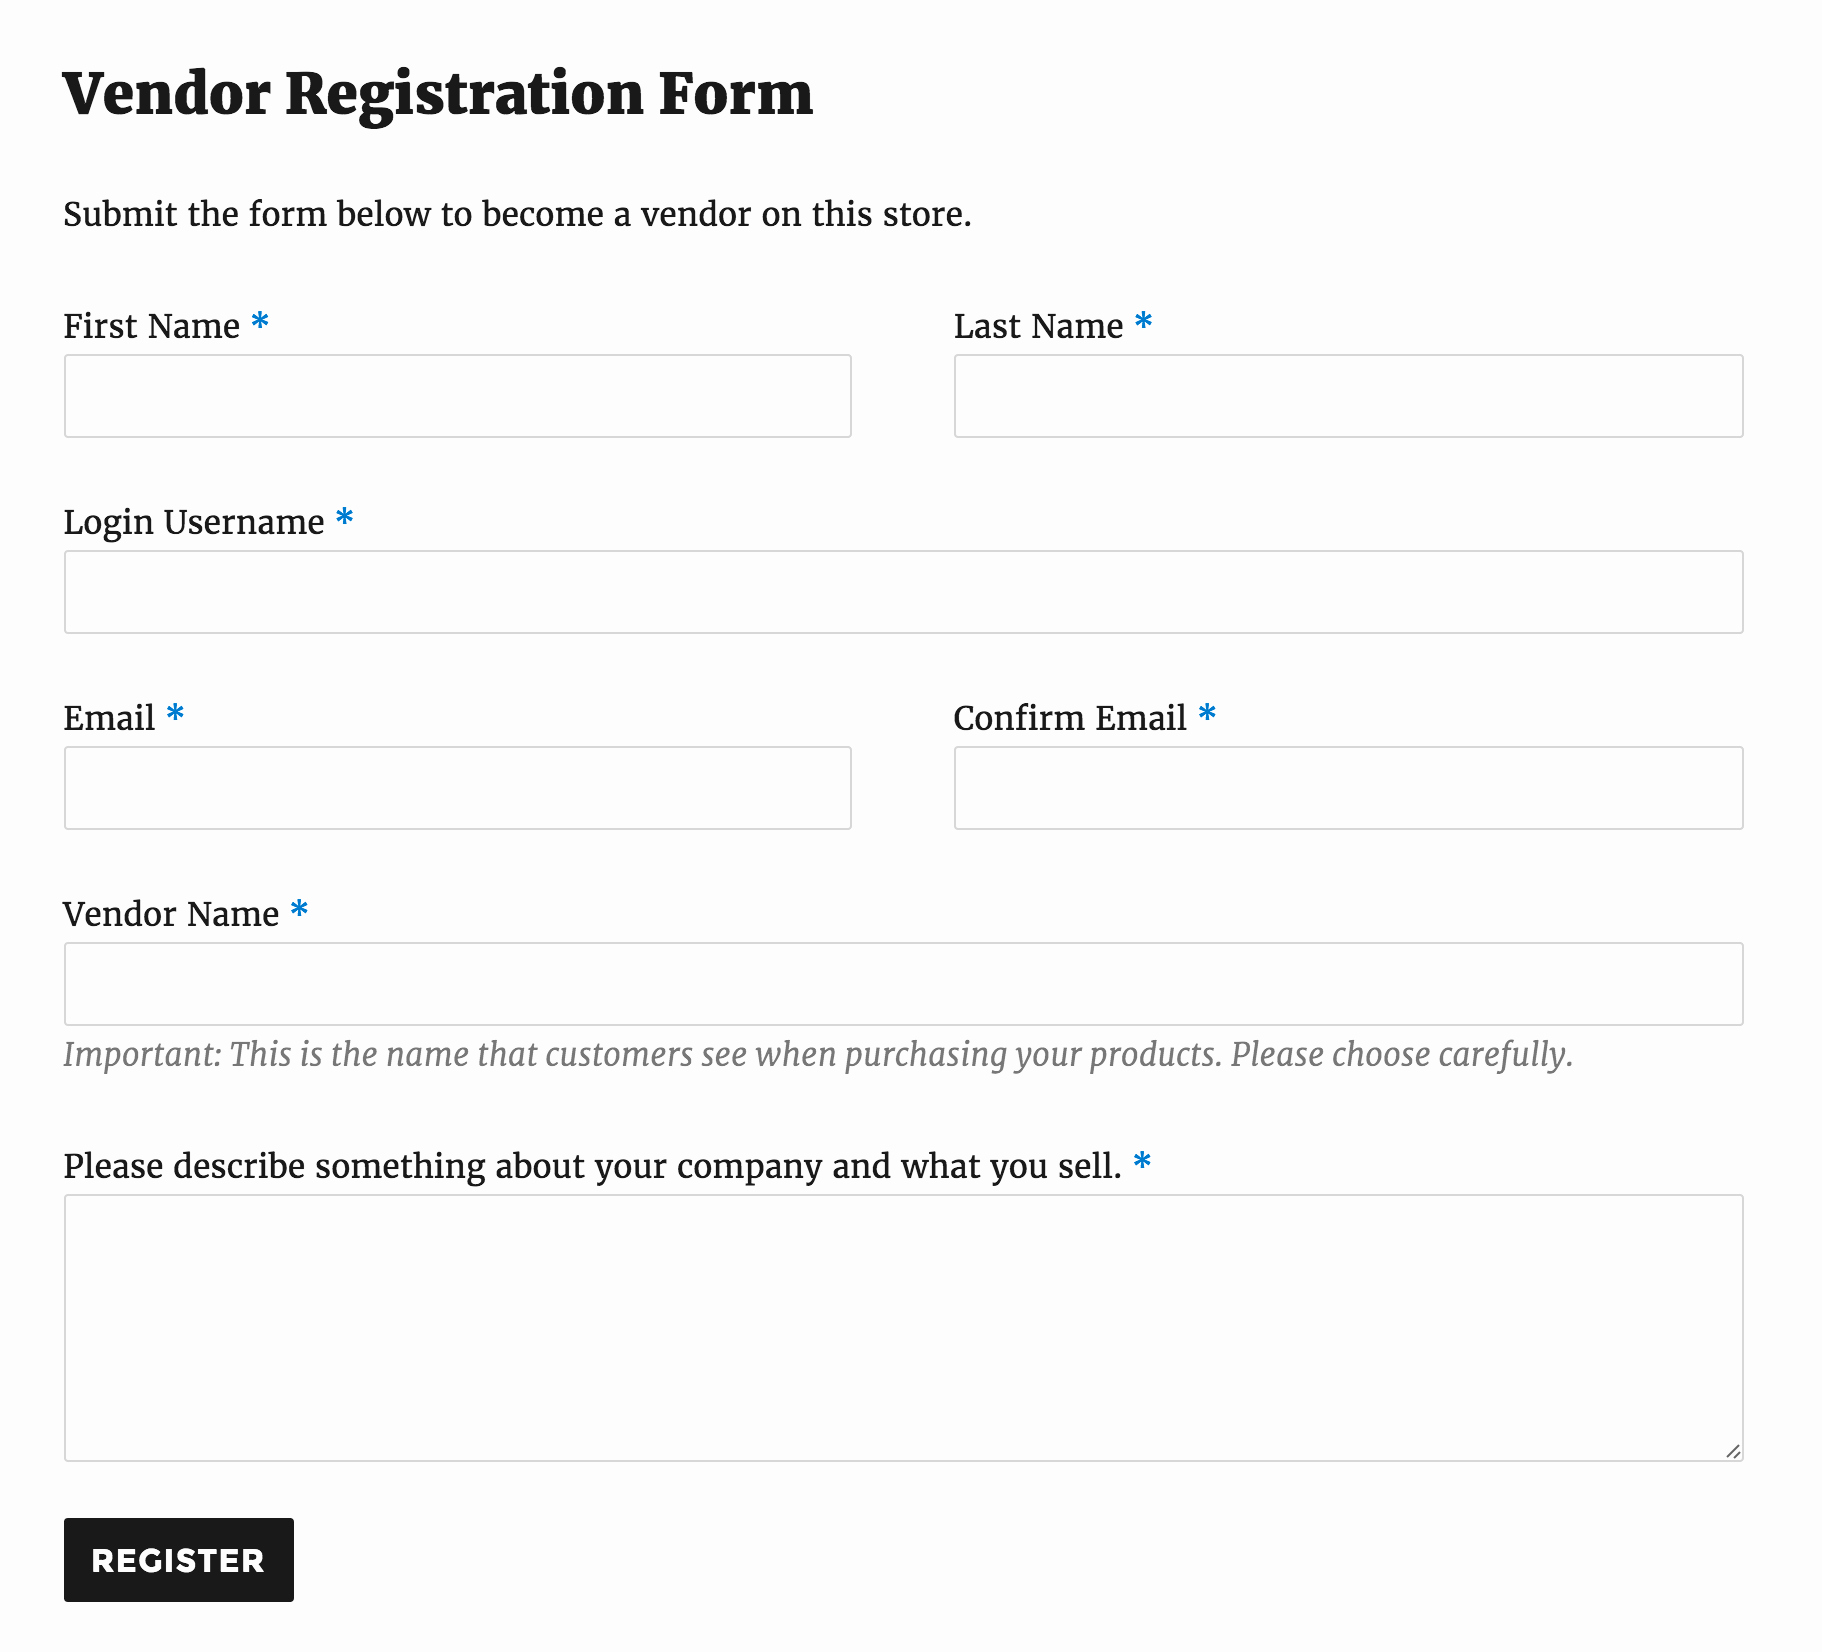 New Vendor Information form Template Awesome Product Vendors 2 0 Makes Managing Vendors Simpler